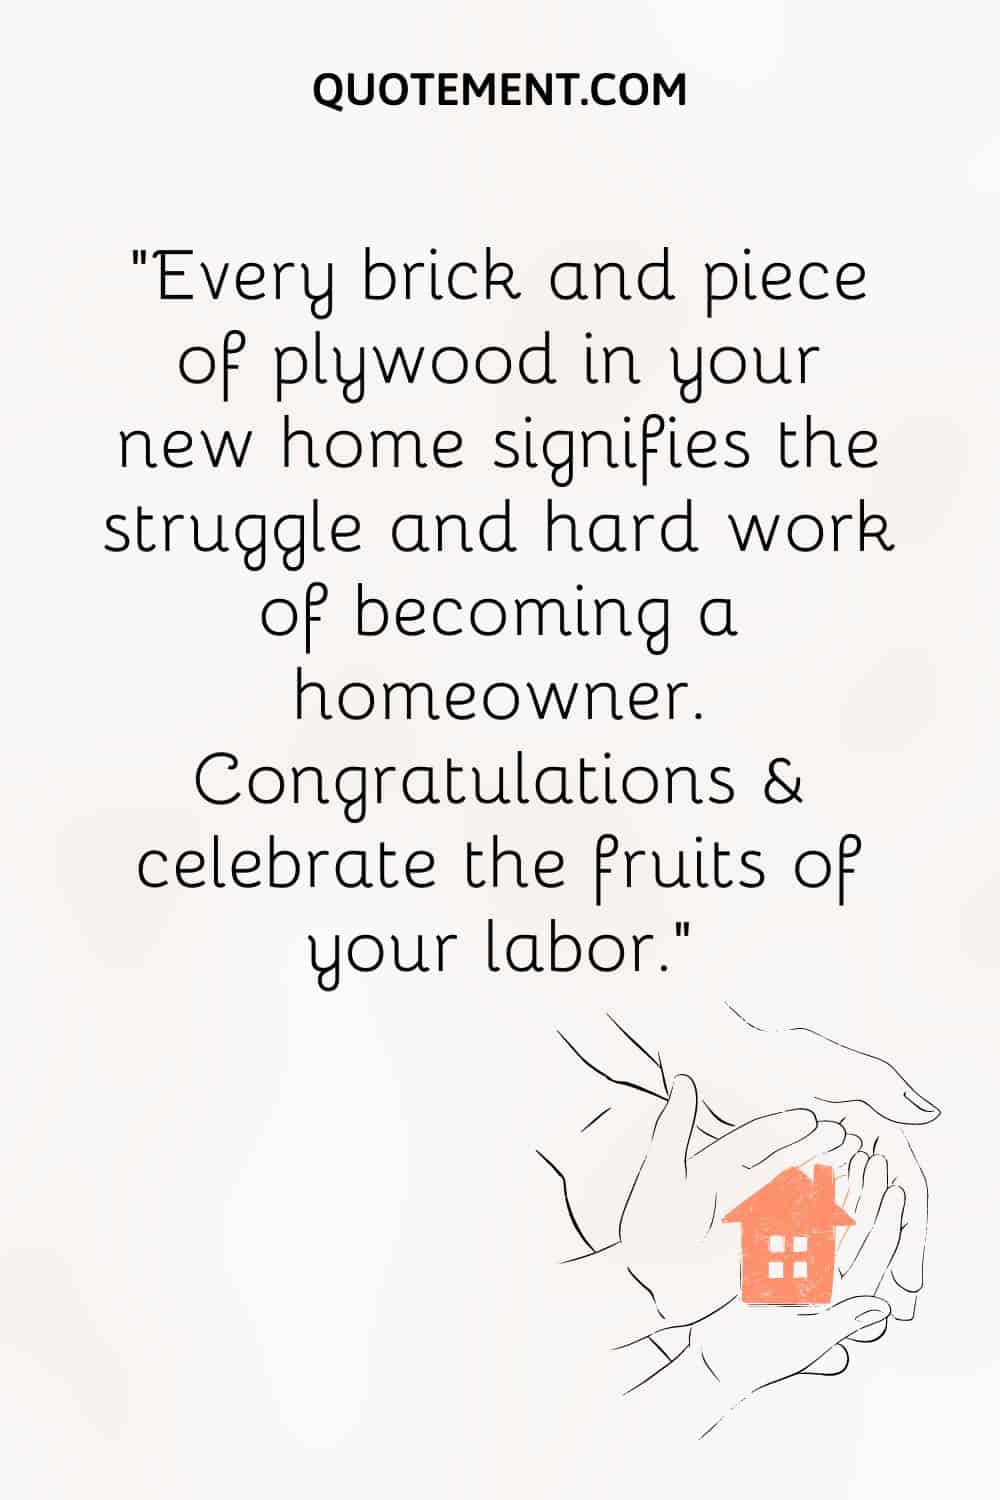 Congratulations & celebrate the fruits of your labor